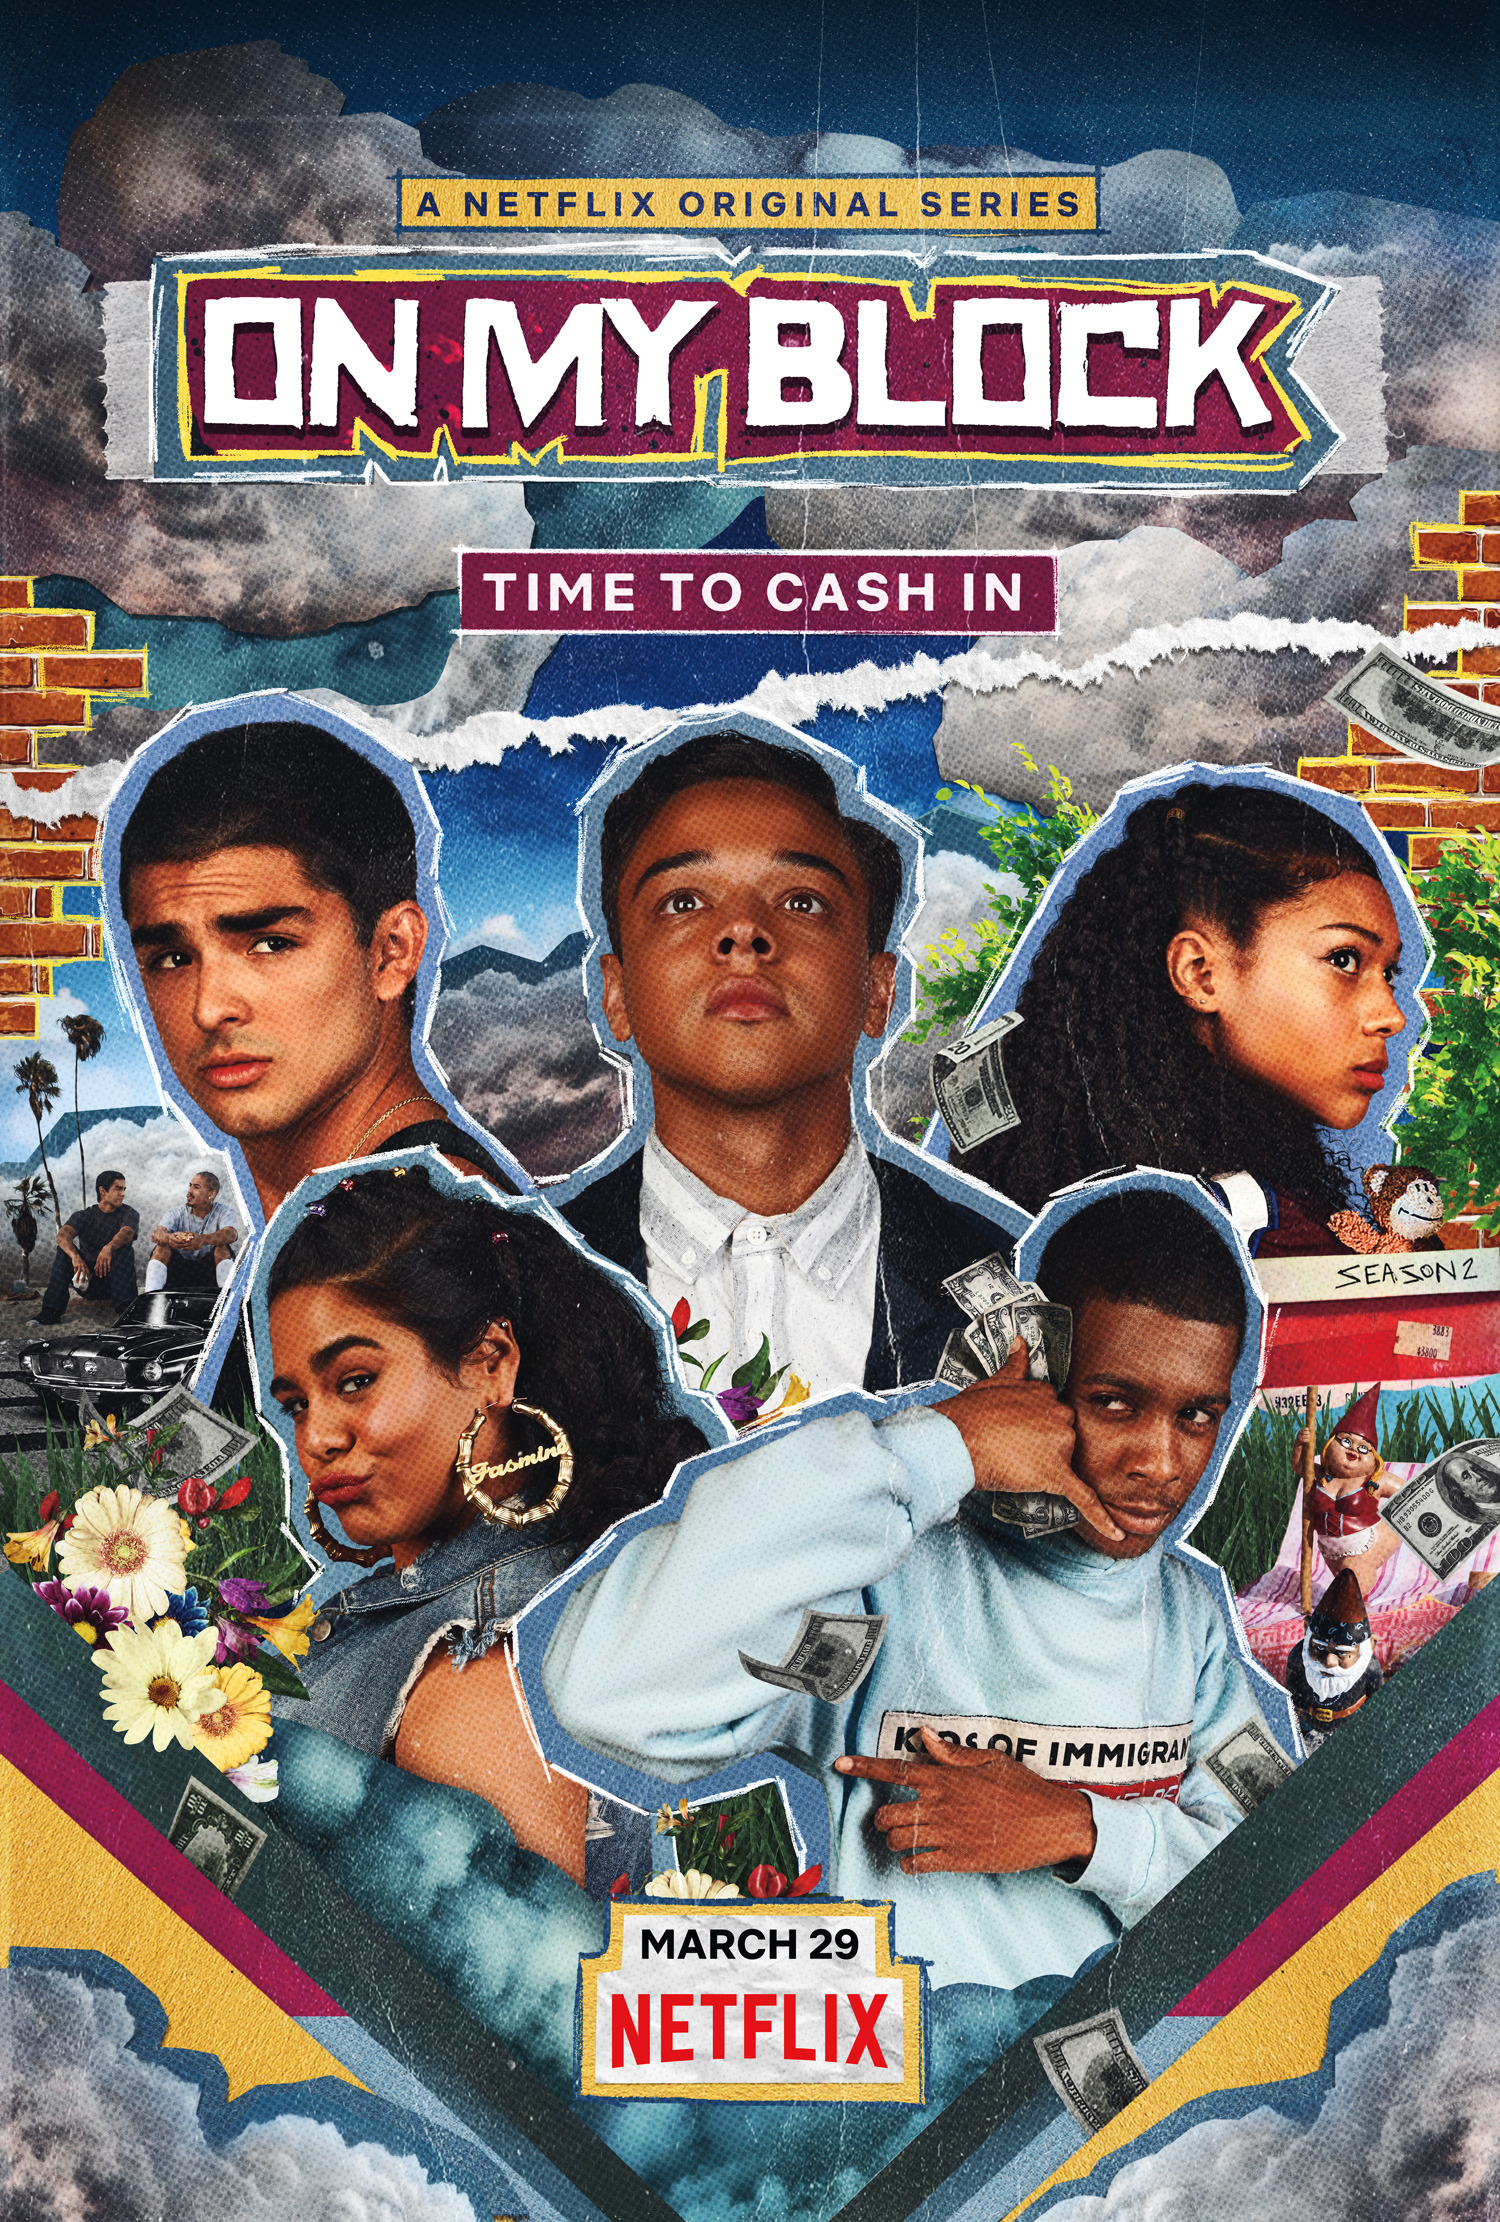 Mega Sized TV Poster Image for On My Block (#2 of 4)